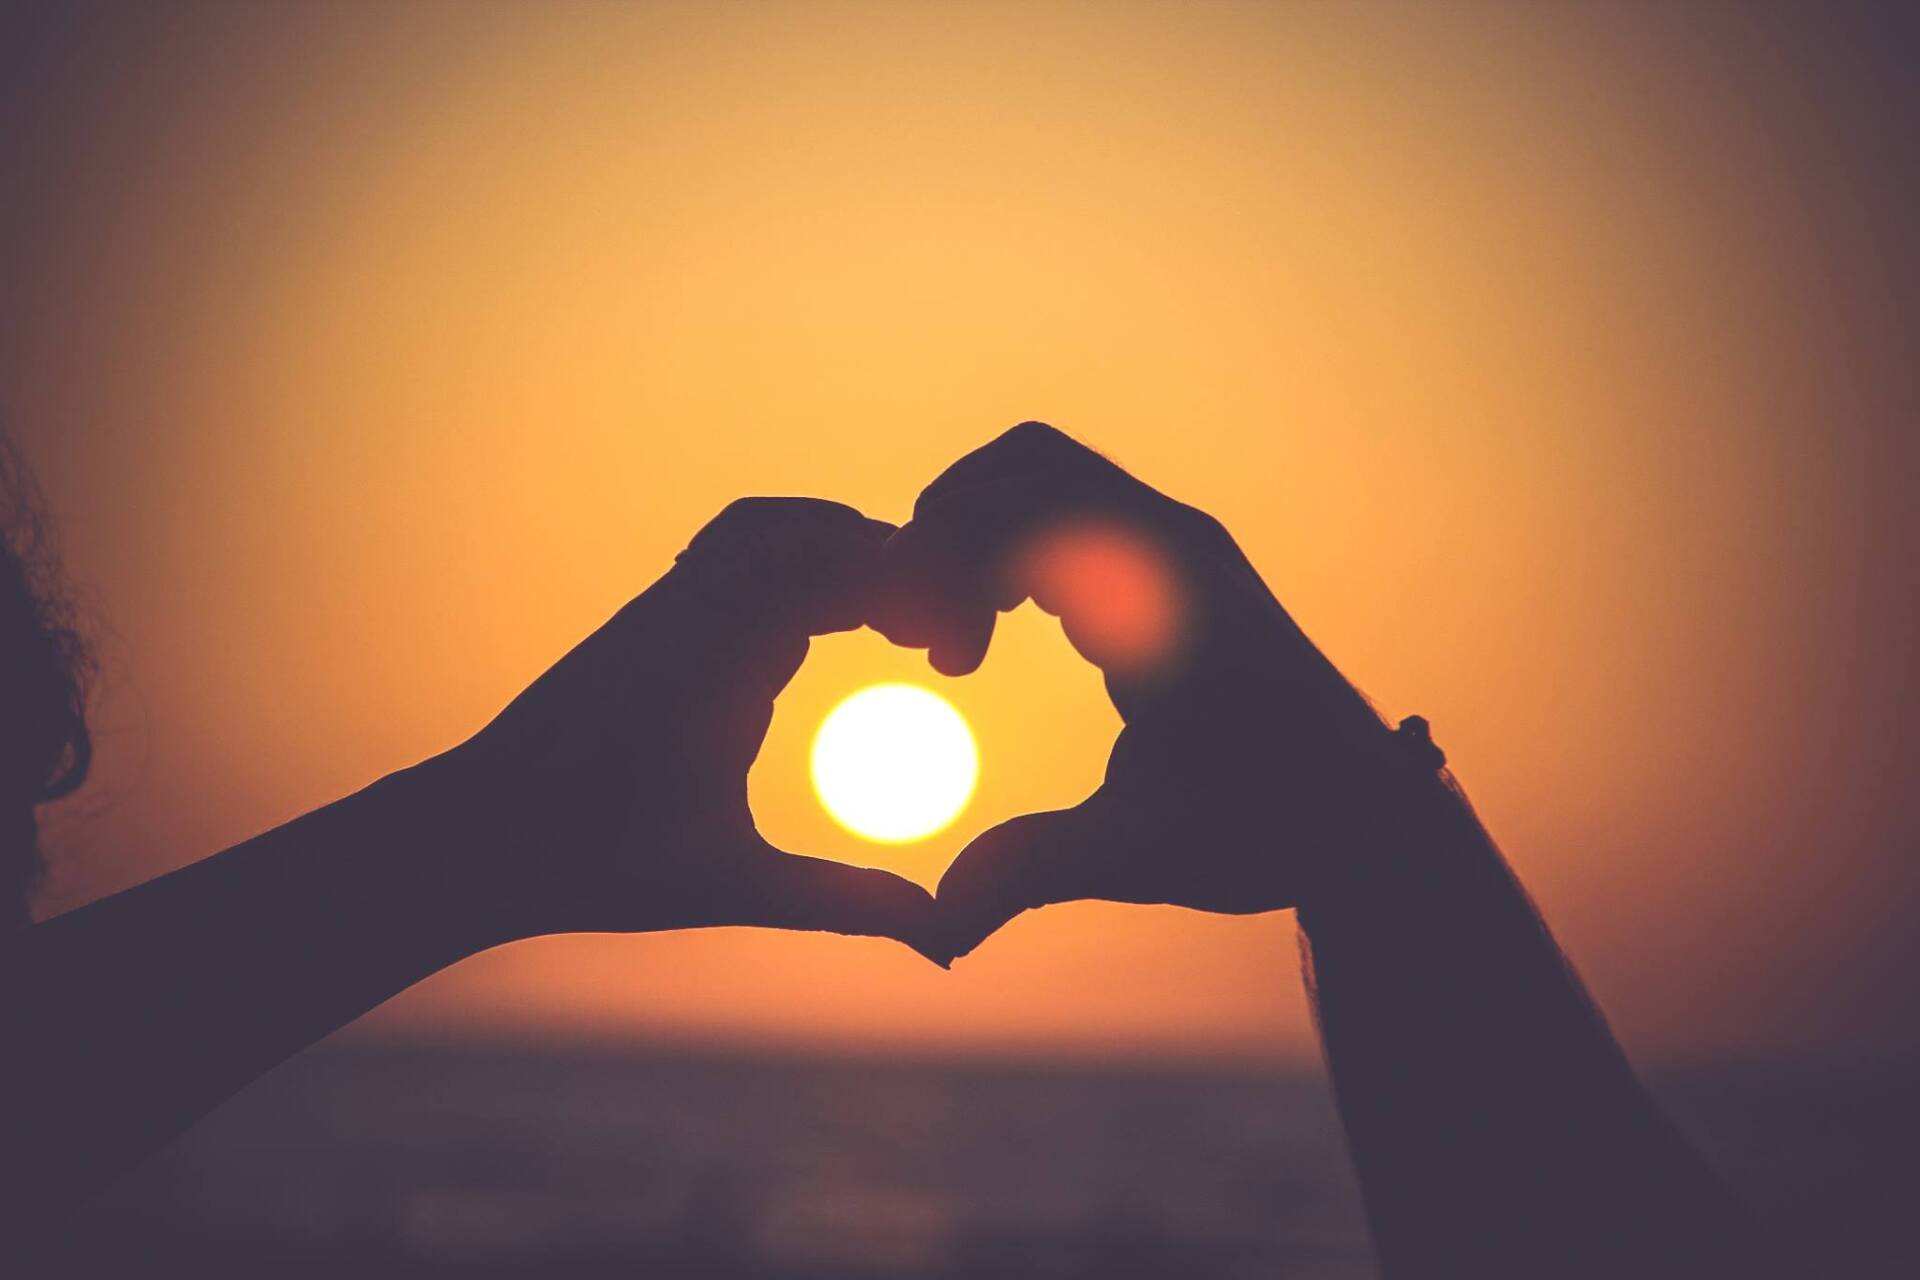 hands in heart shape position with sunset behind